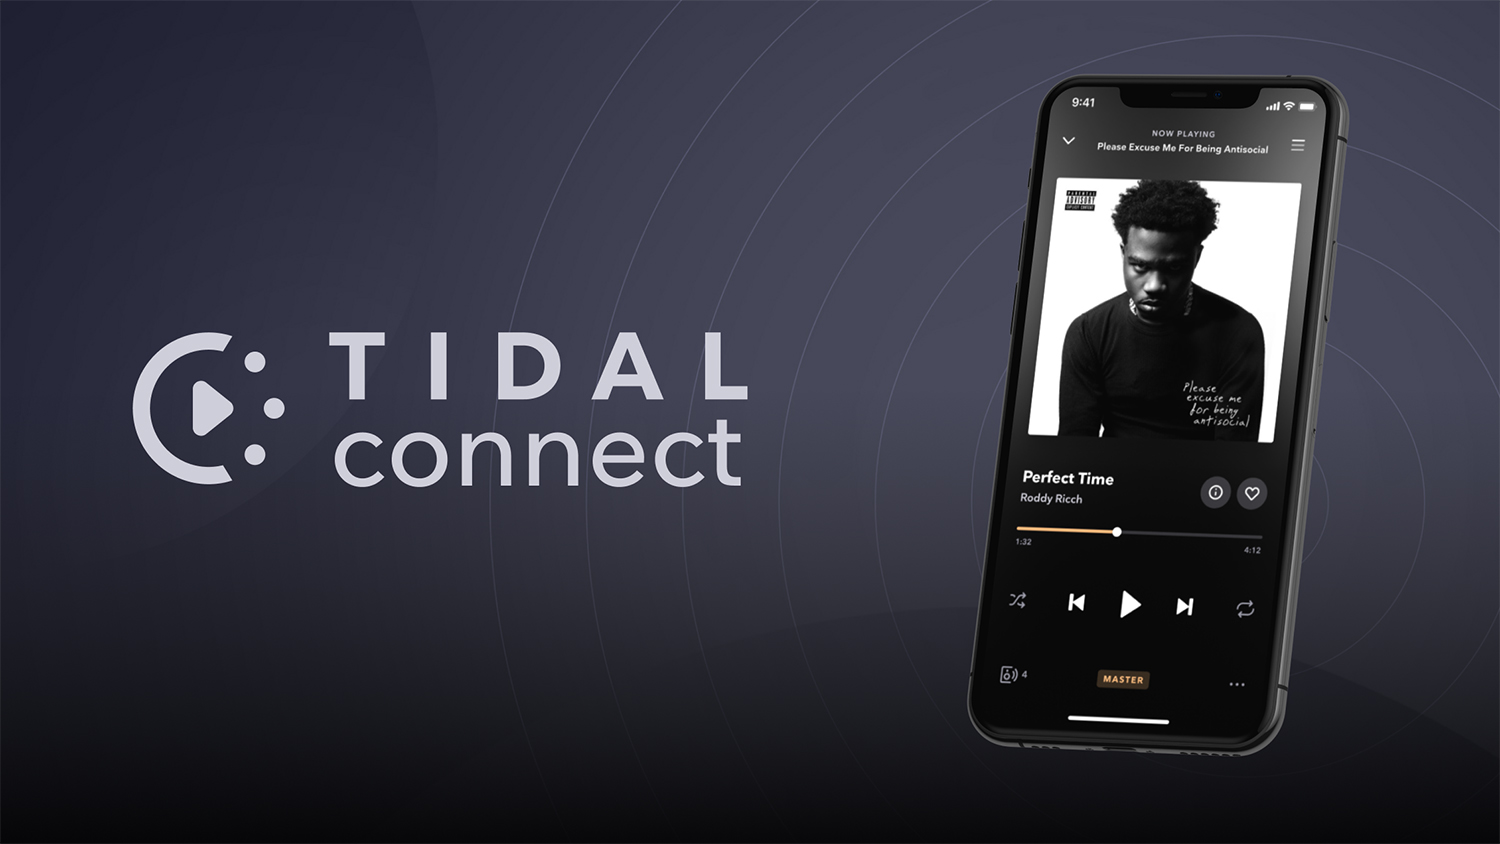 A promo image for Tidal showing the app displayed on a smartphone